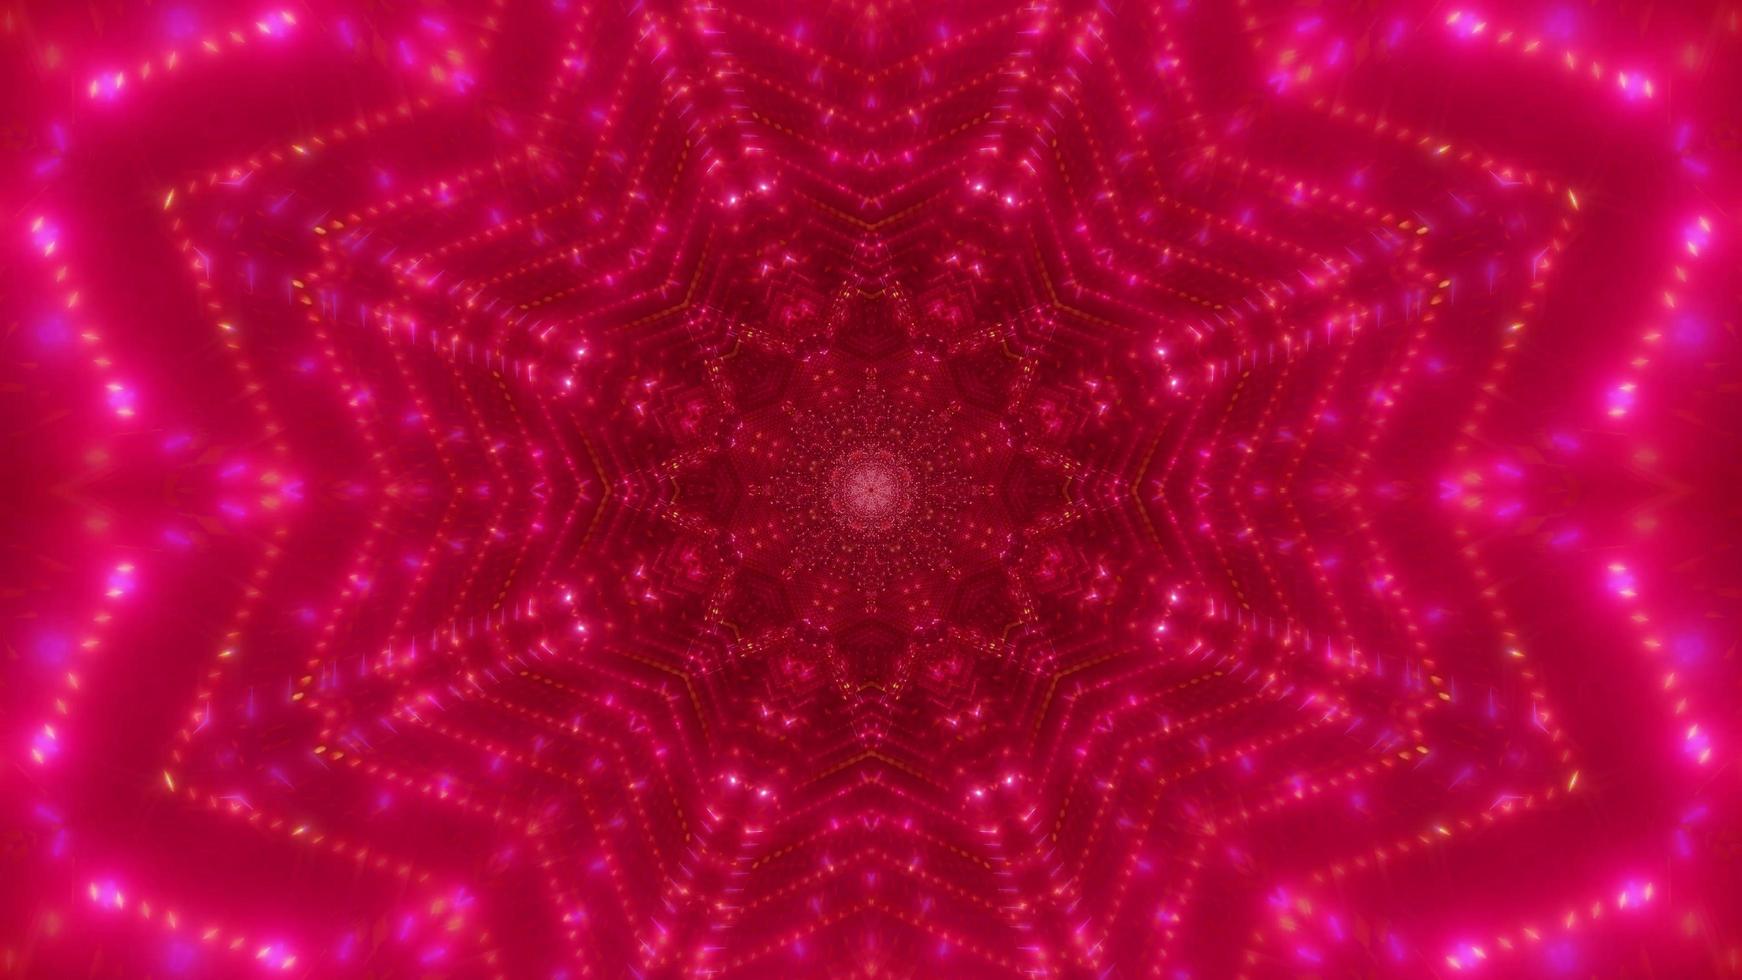 Red, pink, and white light and shapes kaleidoscope 3d illustration for background or wallpaper photo